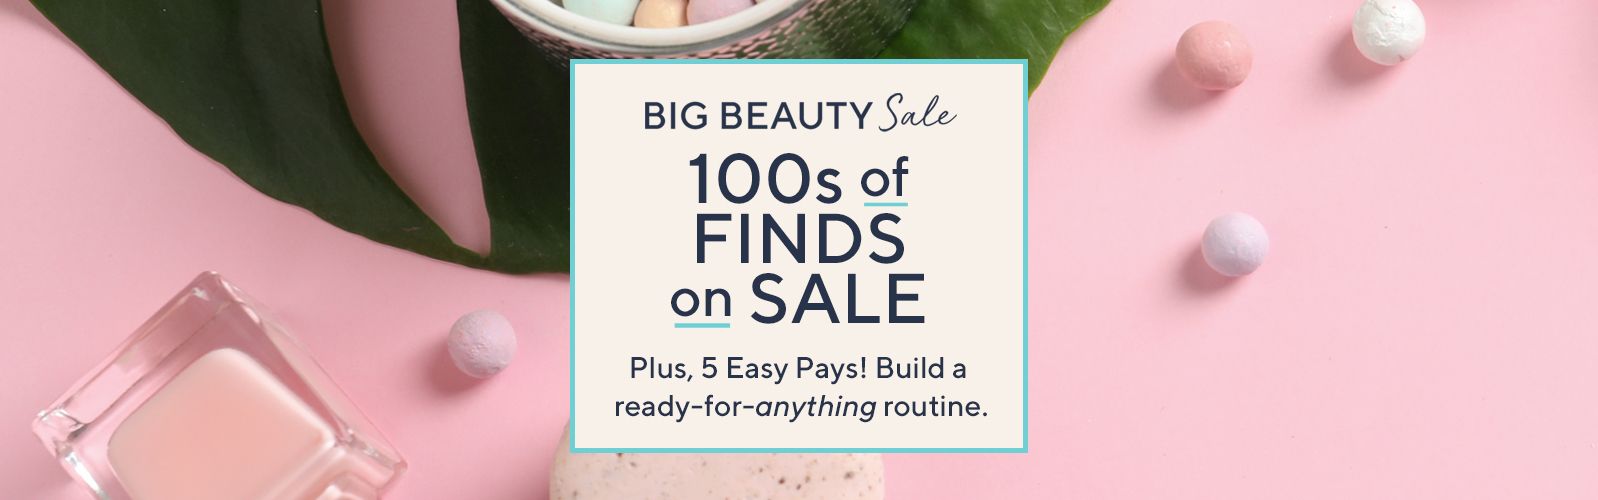 Big Beauty Sale - 100s of Finds on Sale - Plus, 5 Easy Pays! Build a ready-for-anything routine.